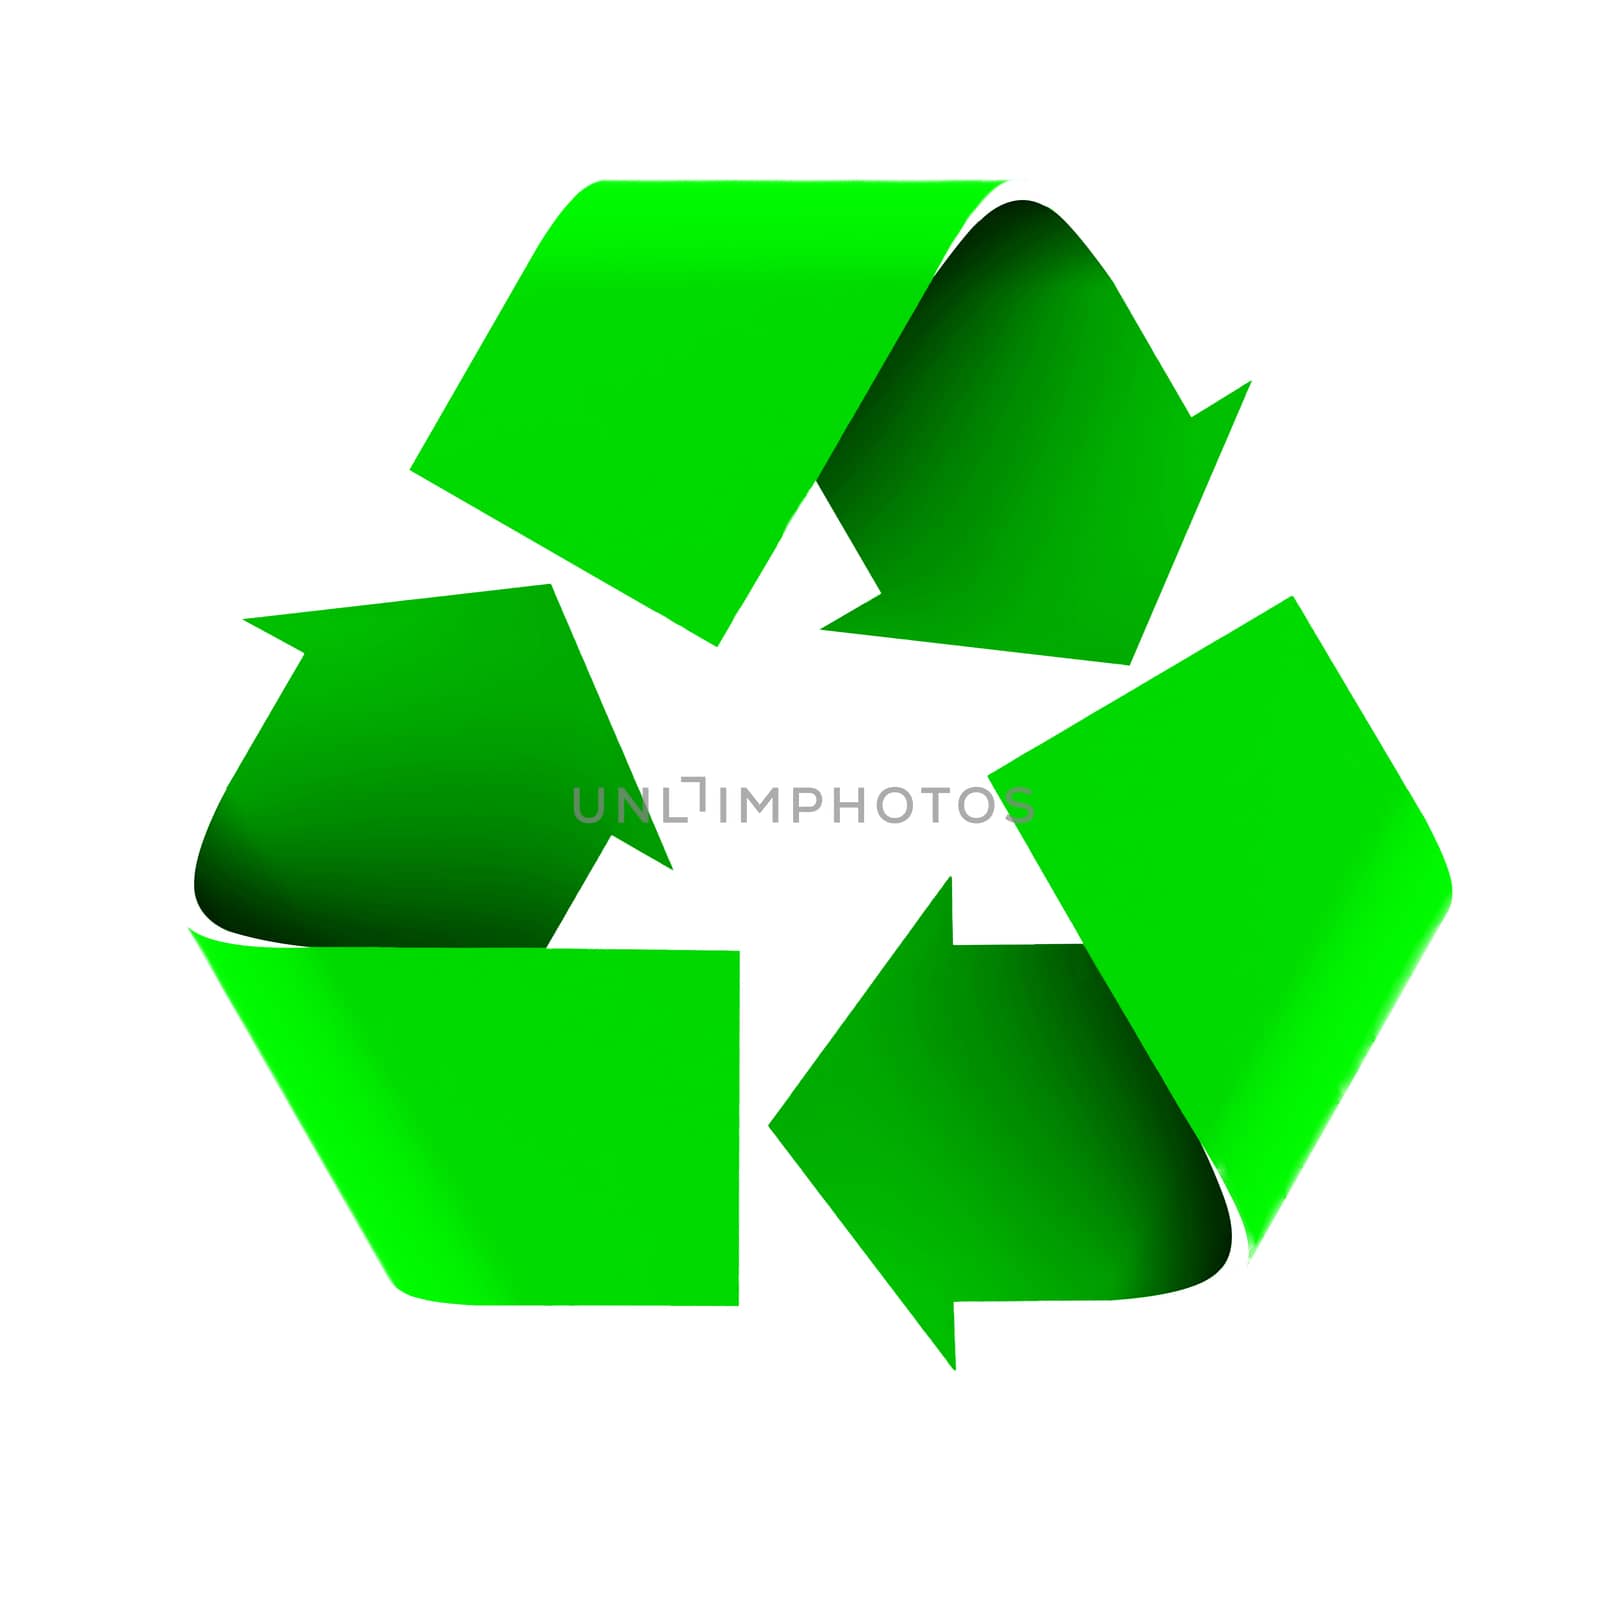 Recycle symbol with gradients and shadows to create depth. Isolated on a white background.